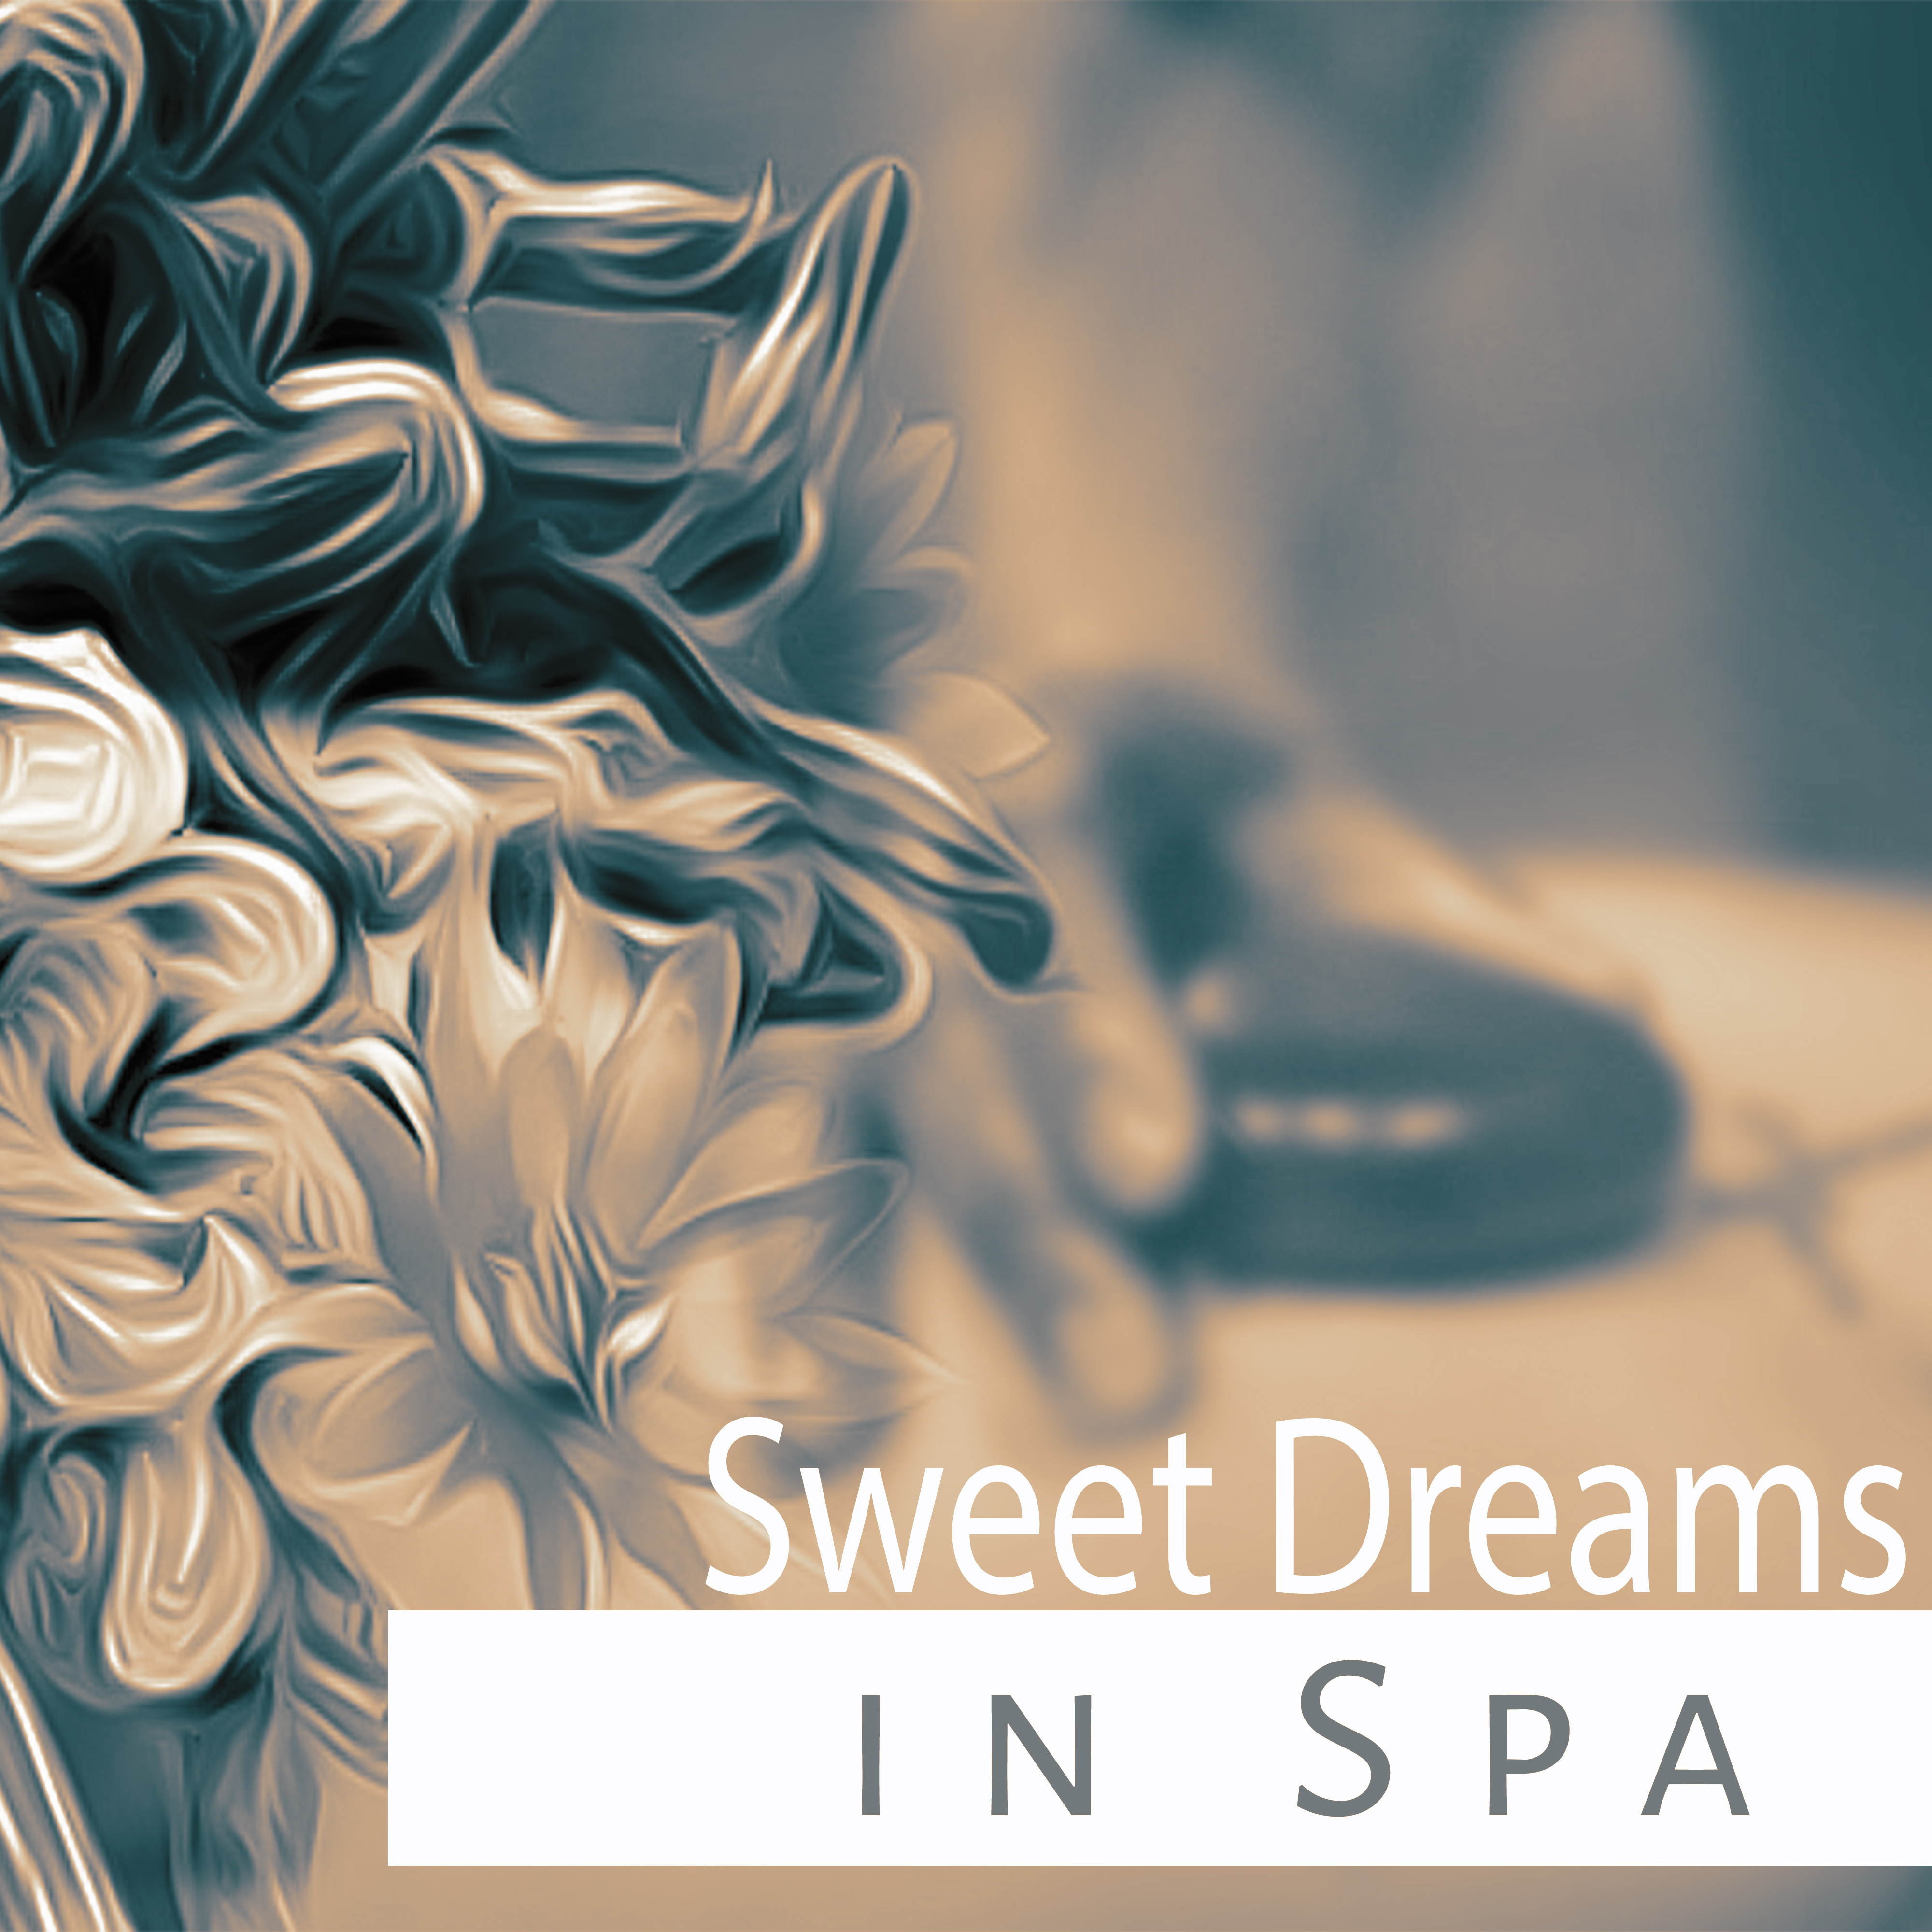 Sweet Dreams in Spa – Relaxation Sounds, Spa Music, Wellness, Deep Sleep, Nature Sounds, Sea Waves, Zen Spa, Peaceful Music